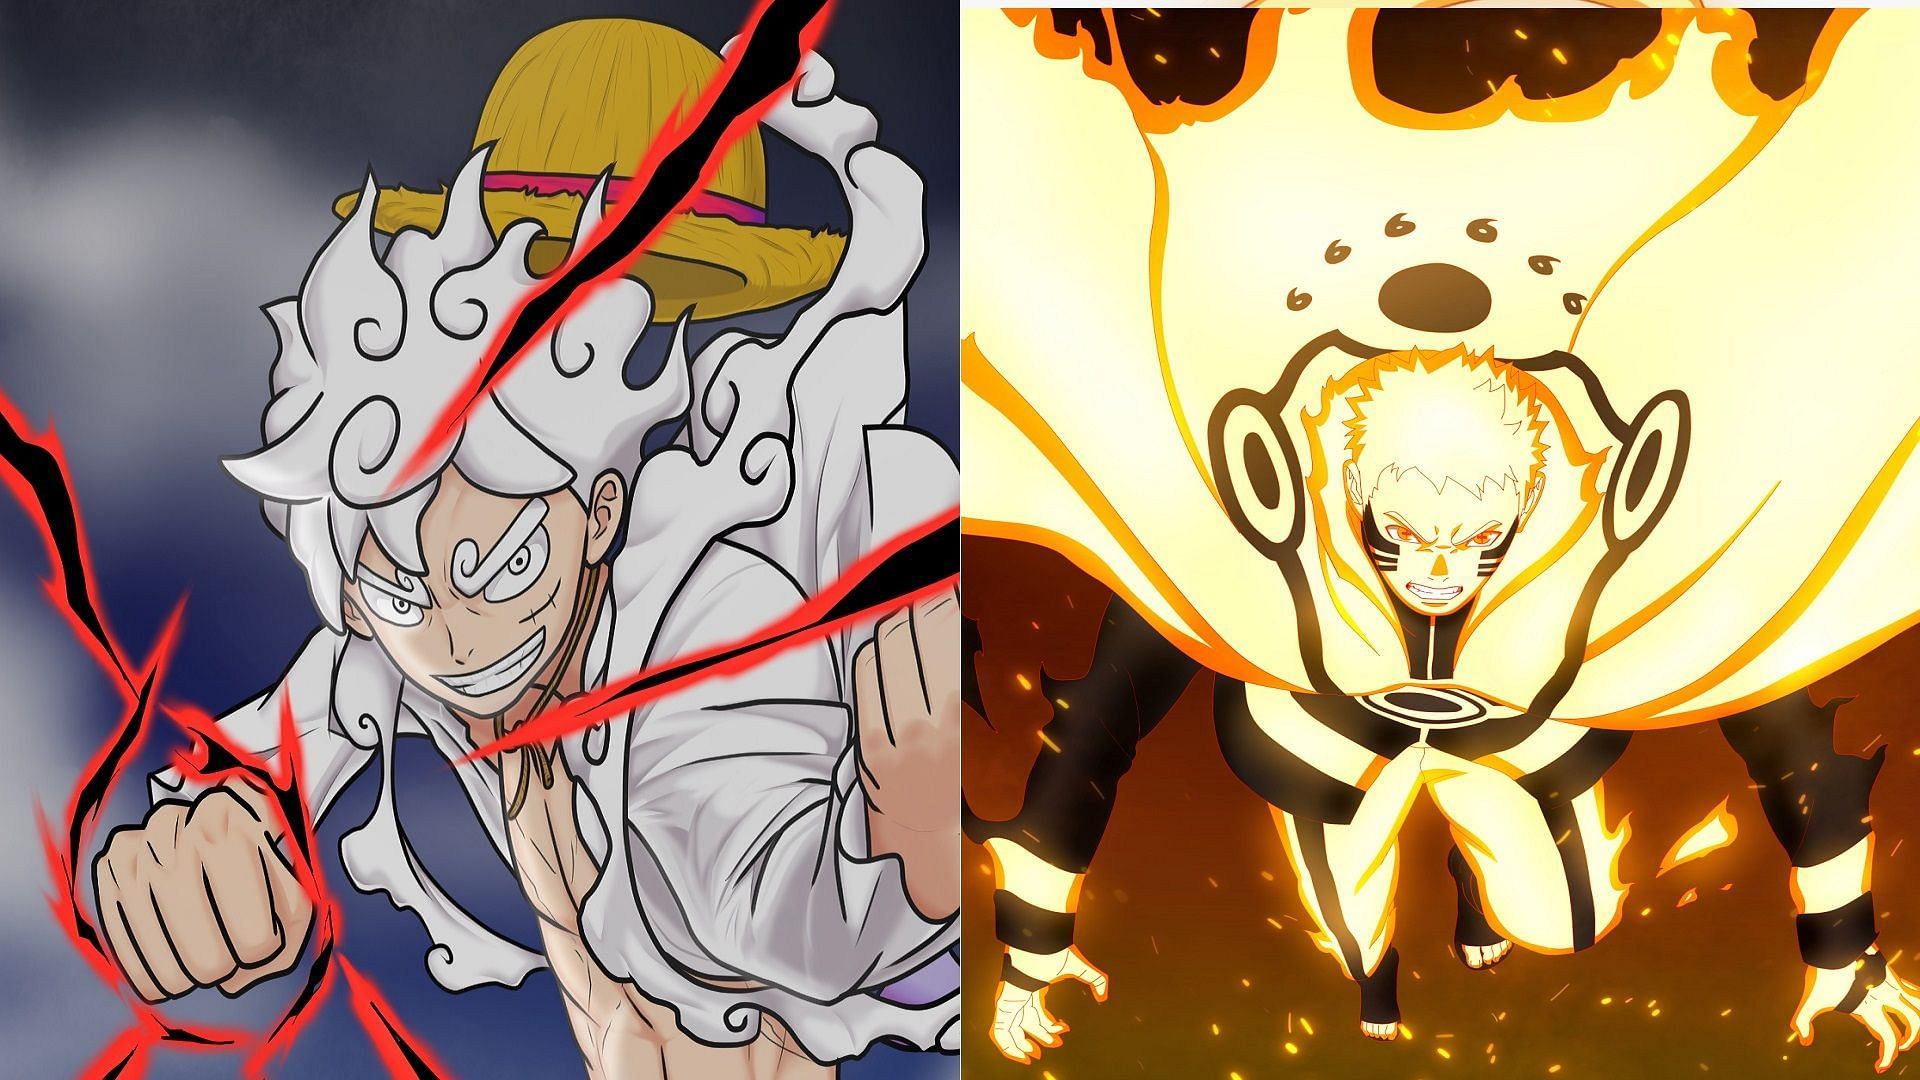 One Piece Haki vs Naruto's Chakra: Which one is the strongest?